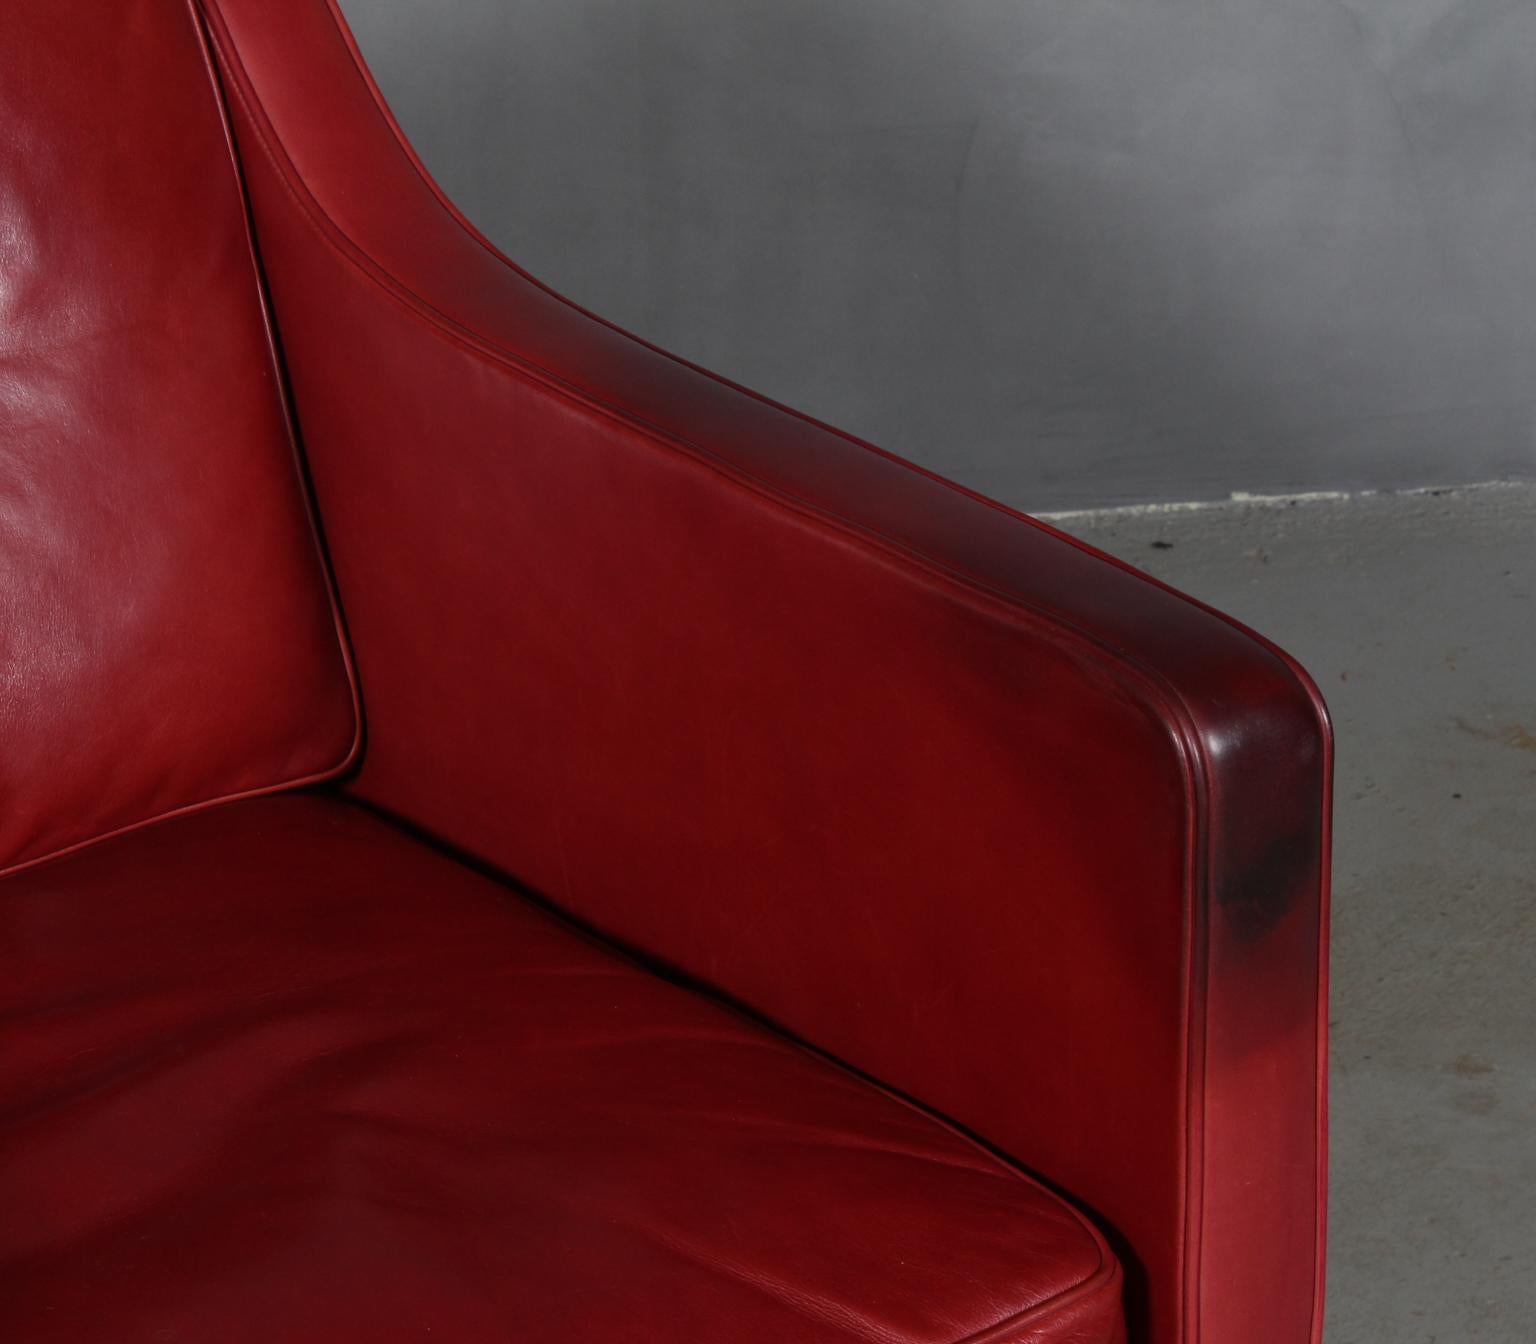 Mid-20th Century Børge Mogensen Lounge Chair, Model 2321, Indian Red Original Leather